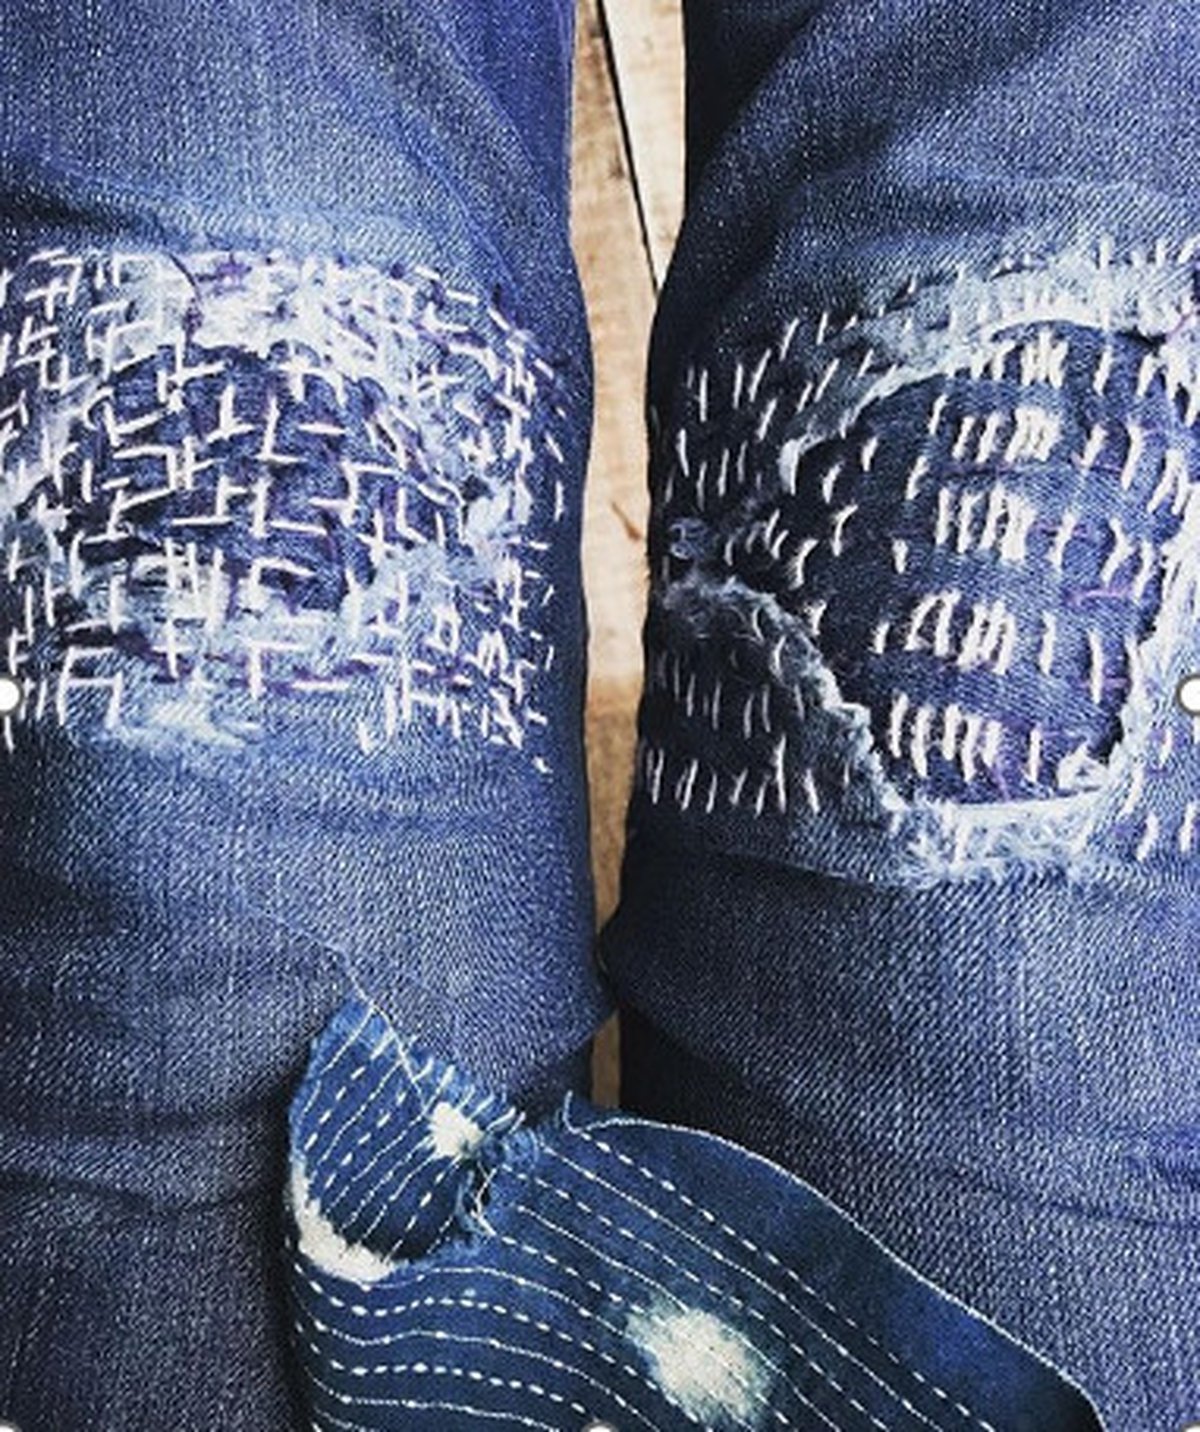 Crotch Blowout and Bobby knits - Repair and Upcycle your clothes